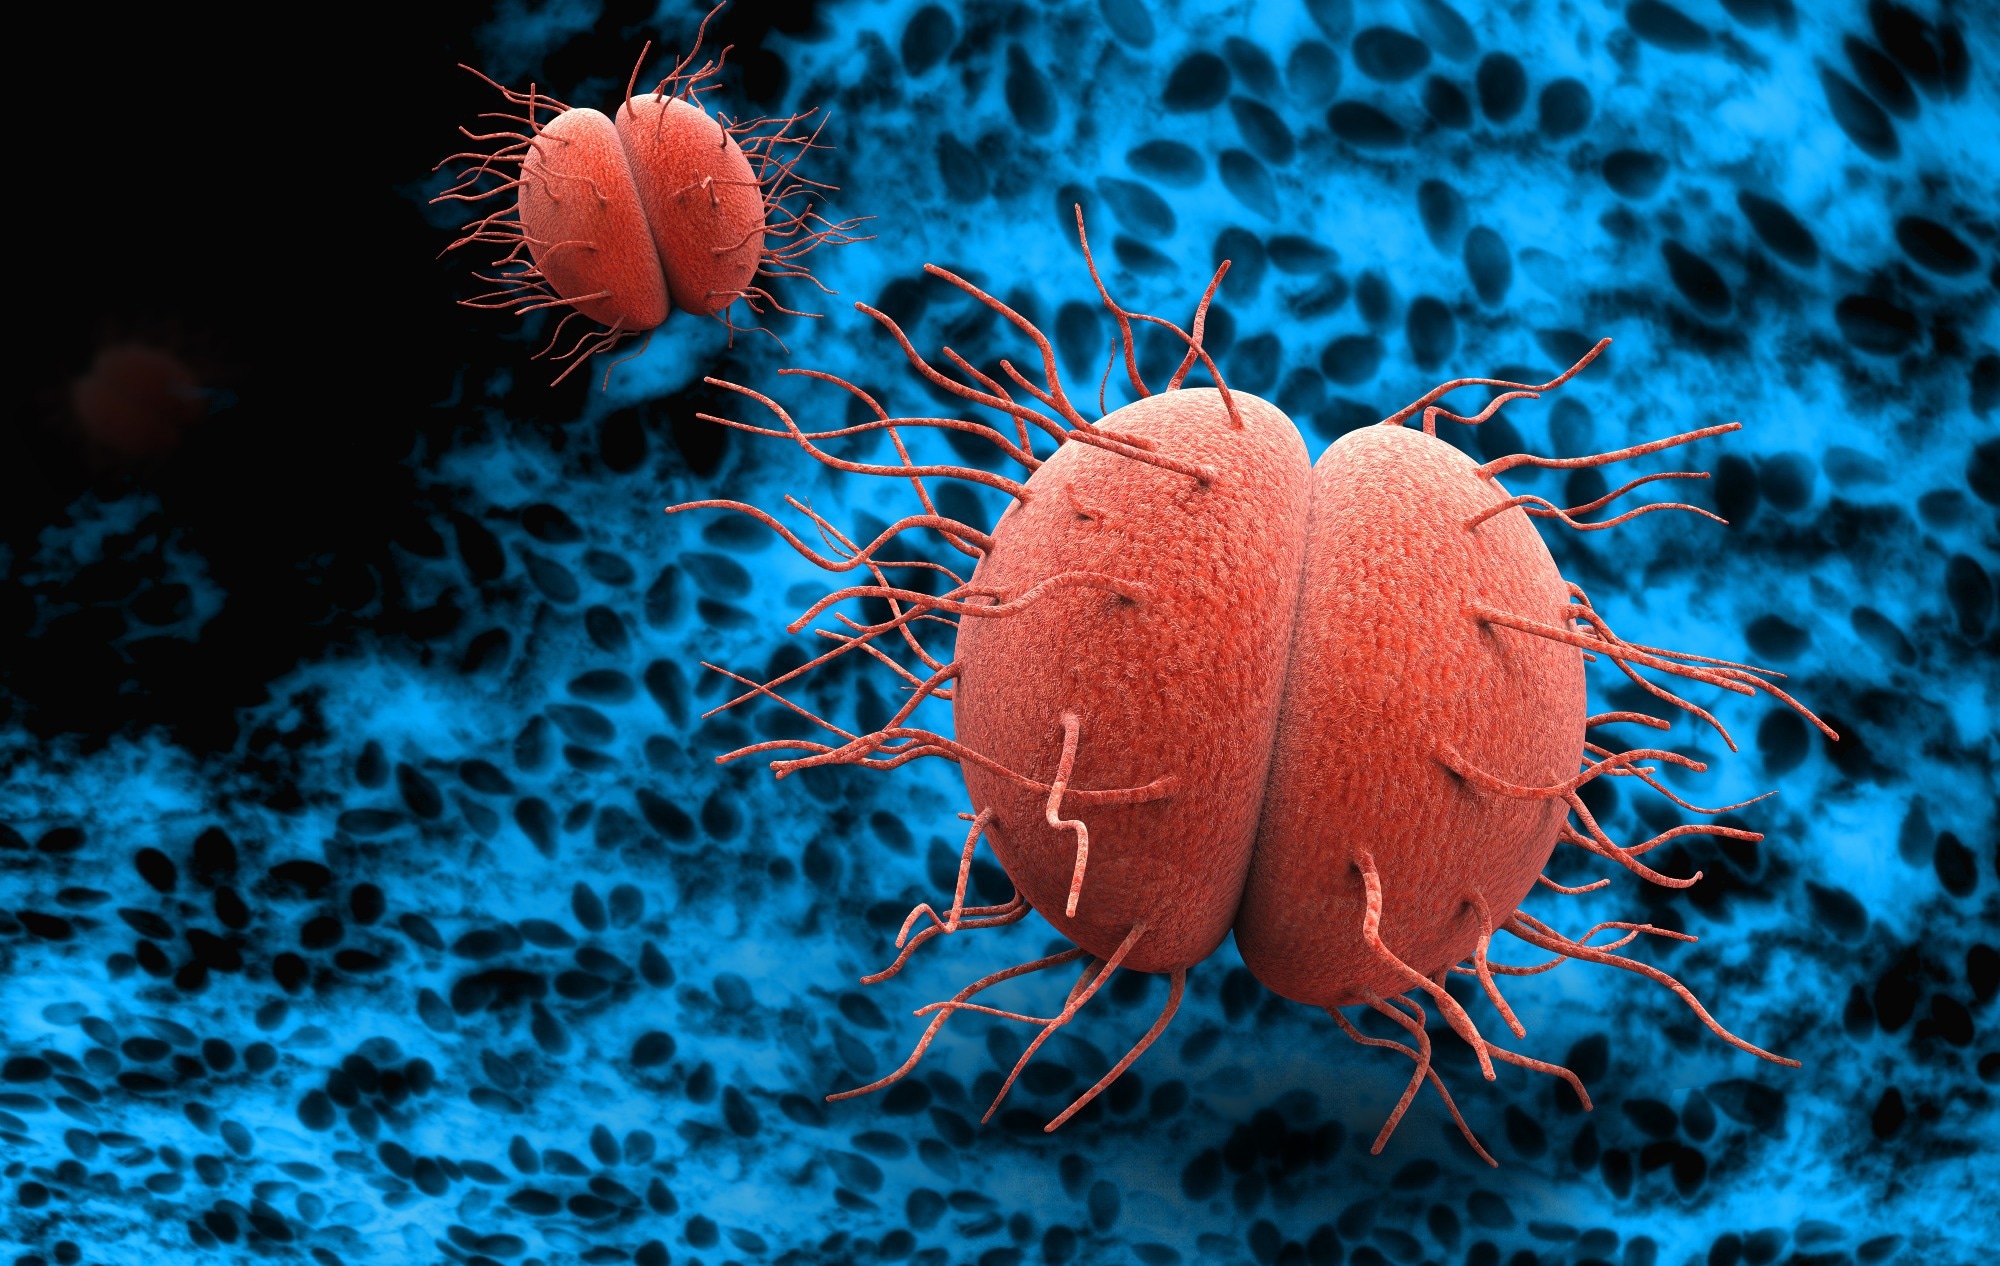 Hormonal steroids found to boost drug resistance in gonorrhea bacteria